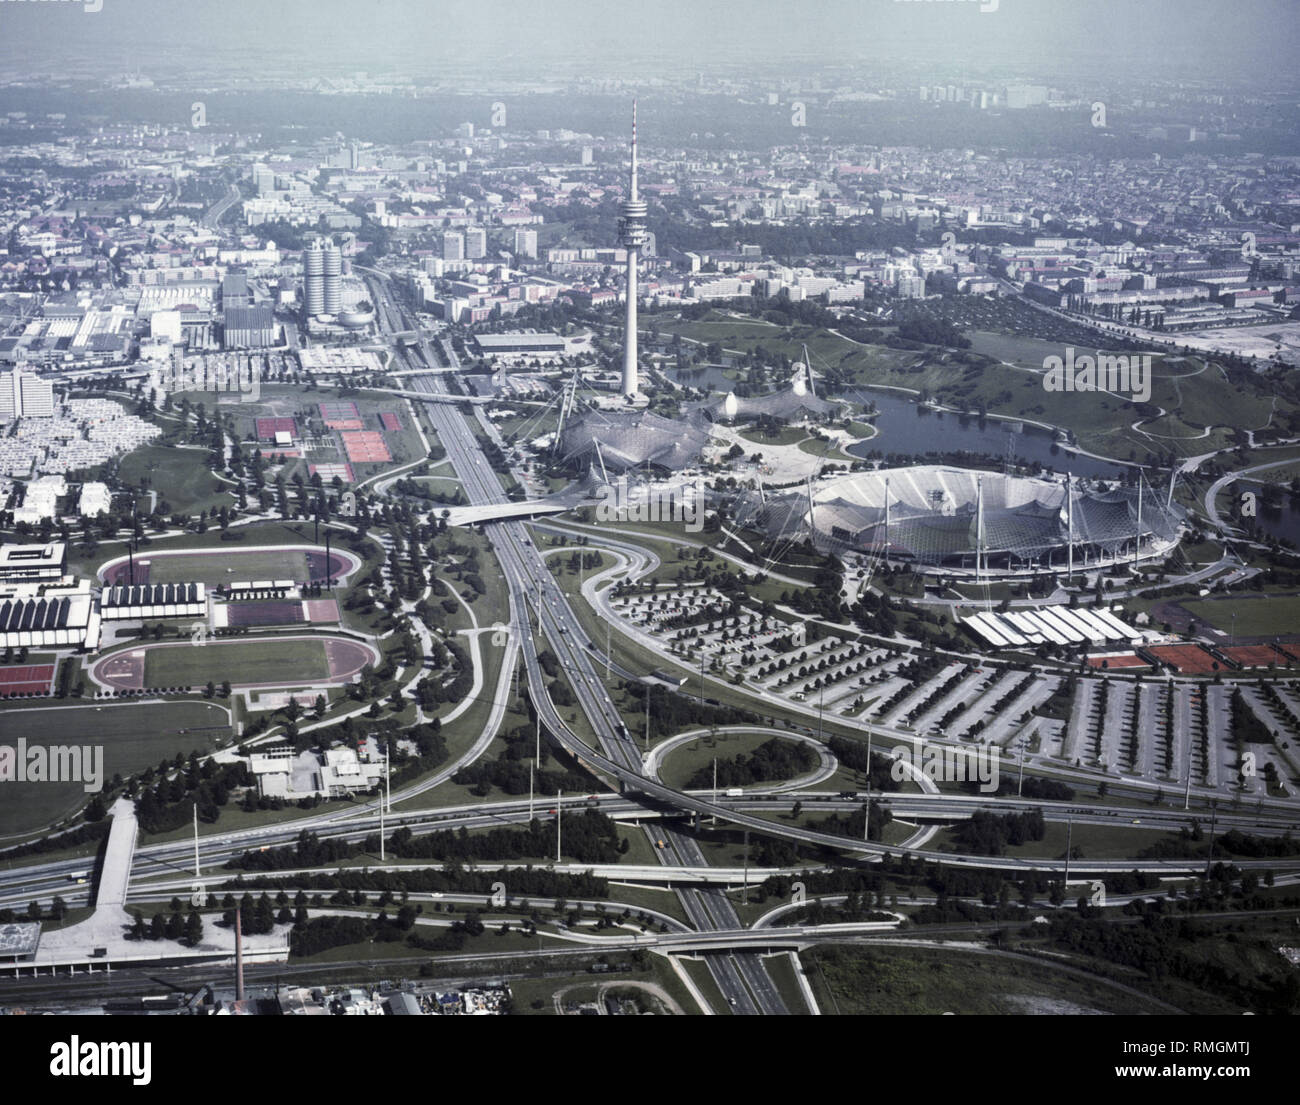 Undated shot of the Munich Olympic Park. In the foreground the intersection Landshuter Allee / Georg-Brauchle-Ring. On the left is the Zentrale Hochschulsportanlage (behind the Olympic Village and the BMW Headquarters.) Right: the Olympic Park with Parkharfe, Werner-von-Linde-Halle, Olympic Stadium, Olympic Hall, Olympic Swimming Pool, Olympic Tower, Olympiasee Lake and Olympiaberg. Stock Photo